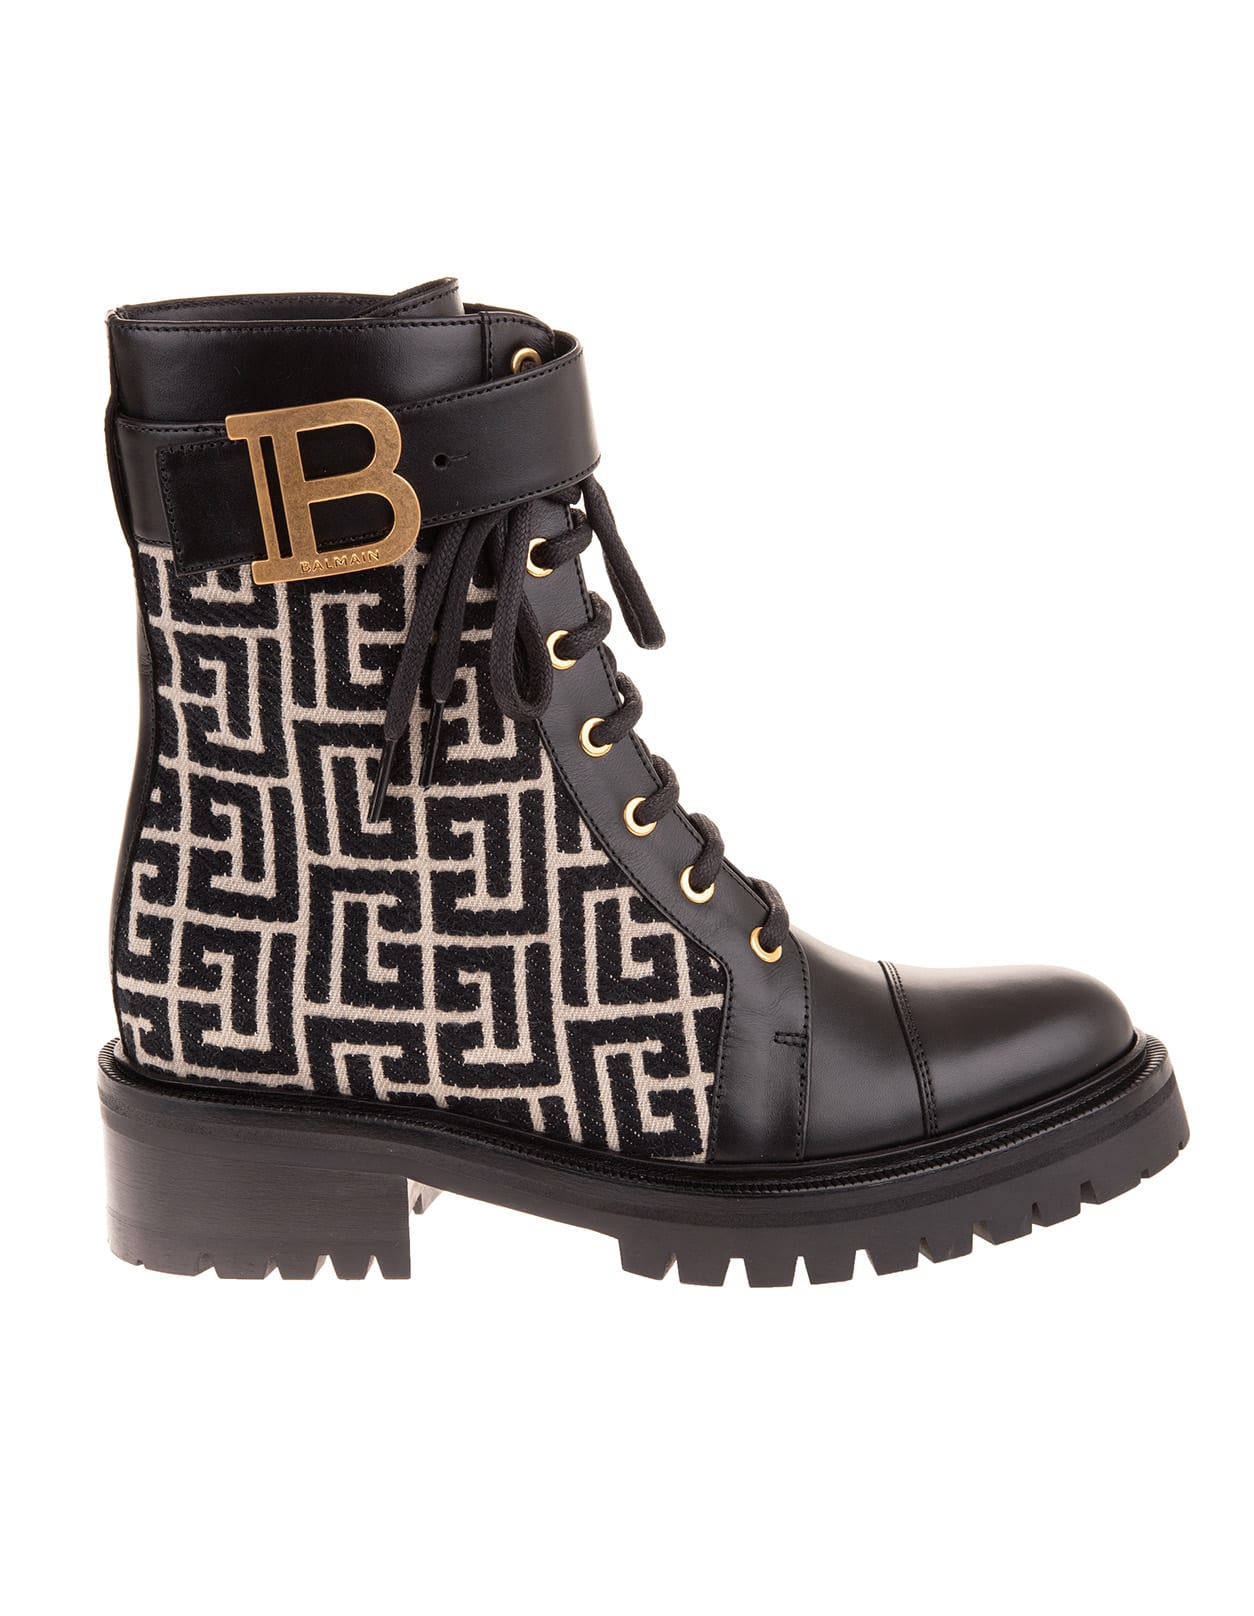 Balmain Ranger Romy Ankle Boots In Black And Ivory Bicolor Jacquard